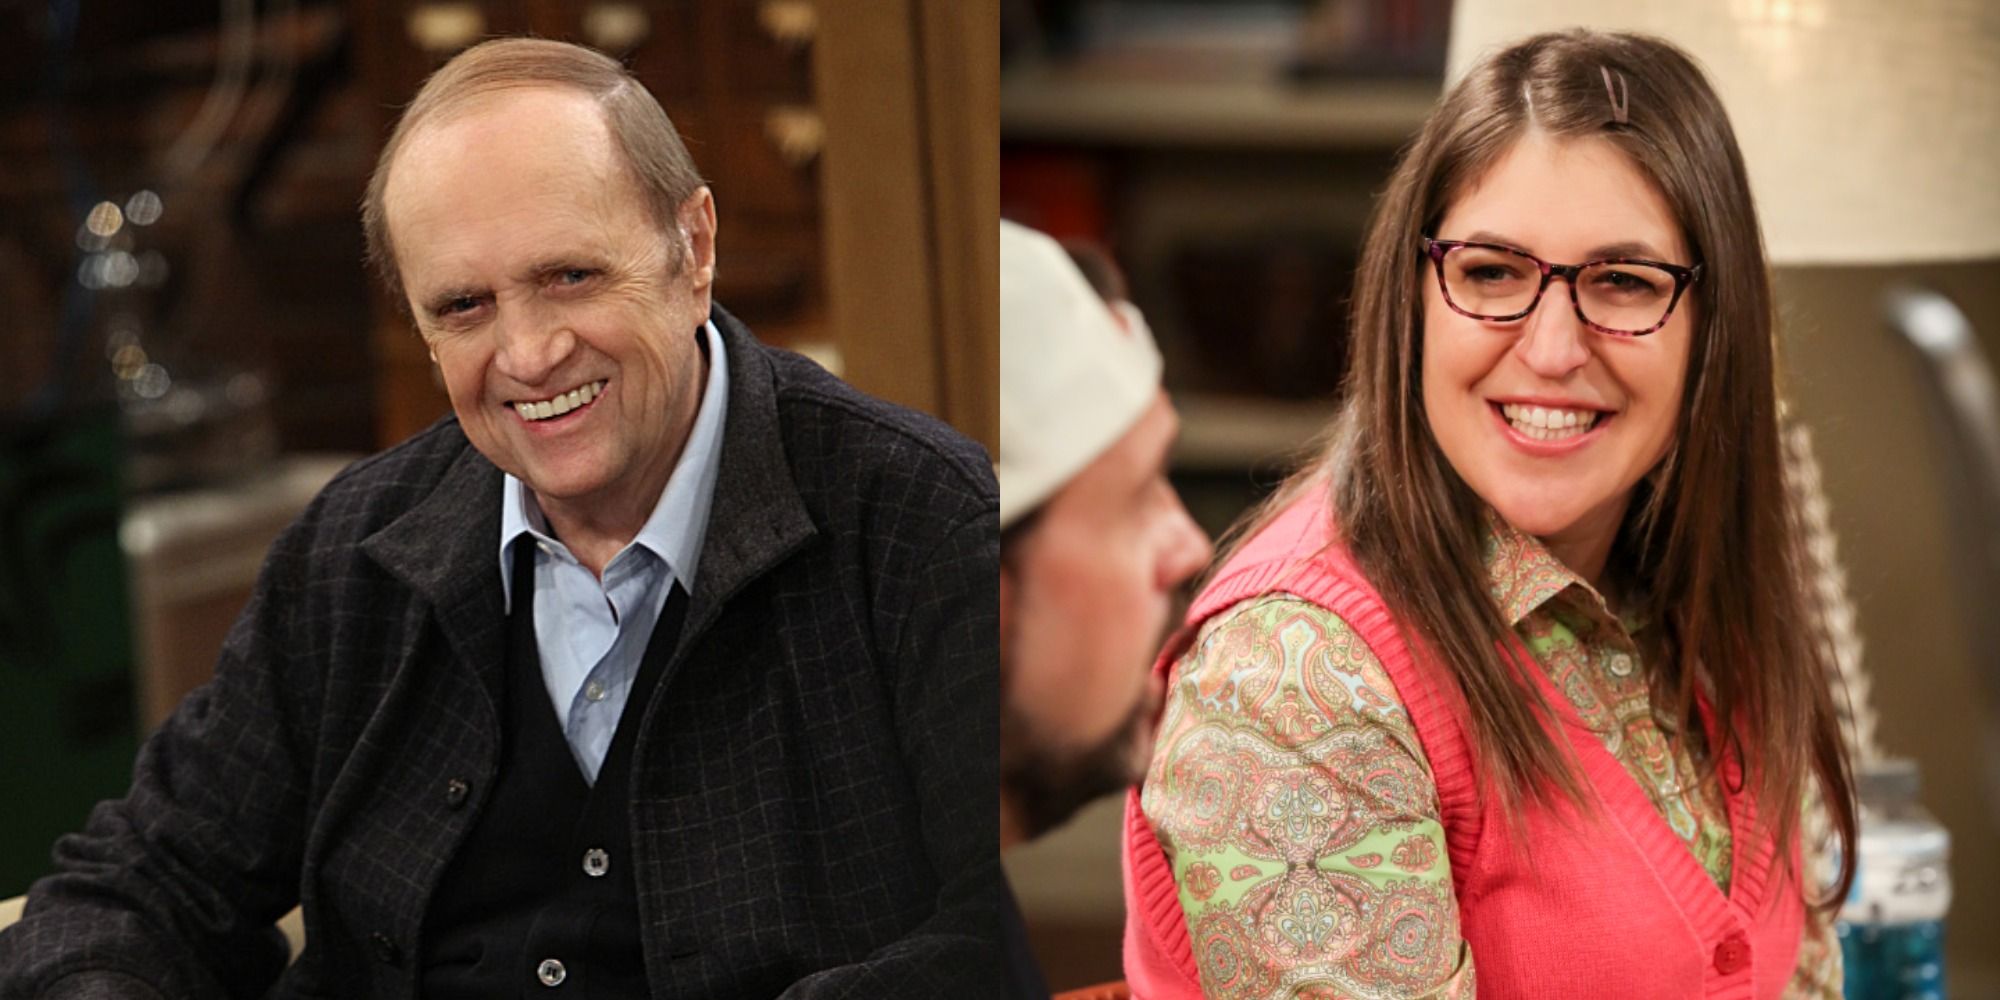 Split image showing Professor Proton and Amy in The Big Bang Theory